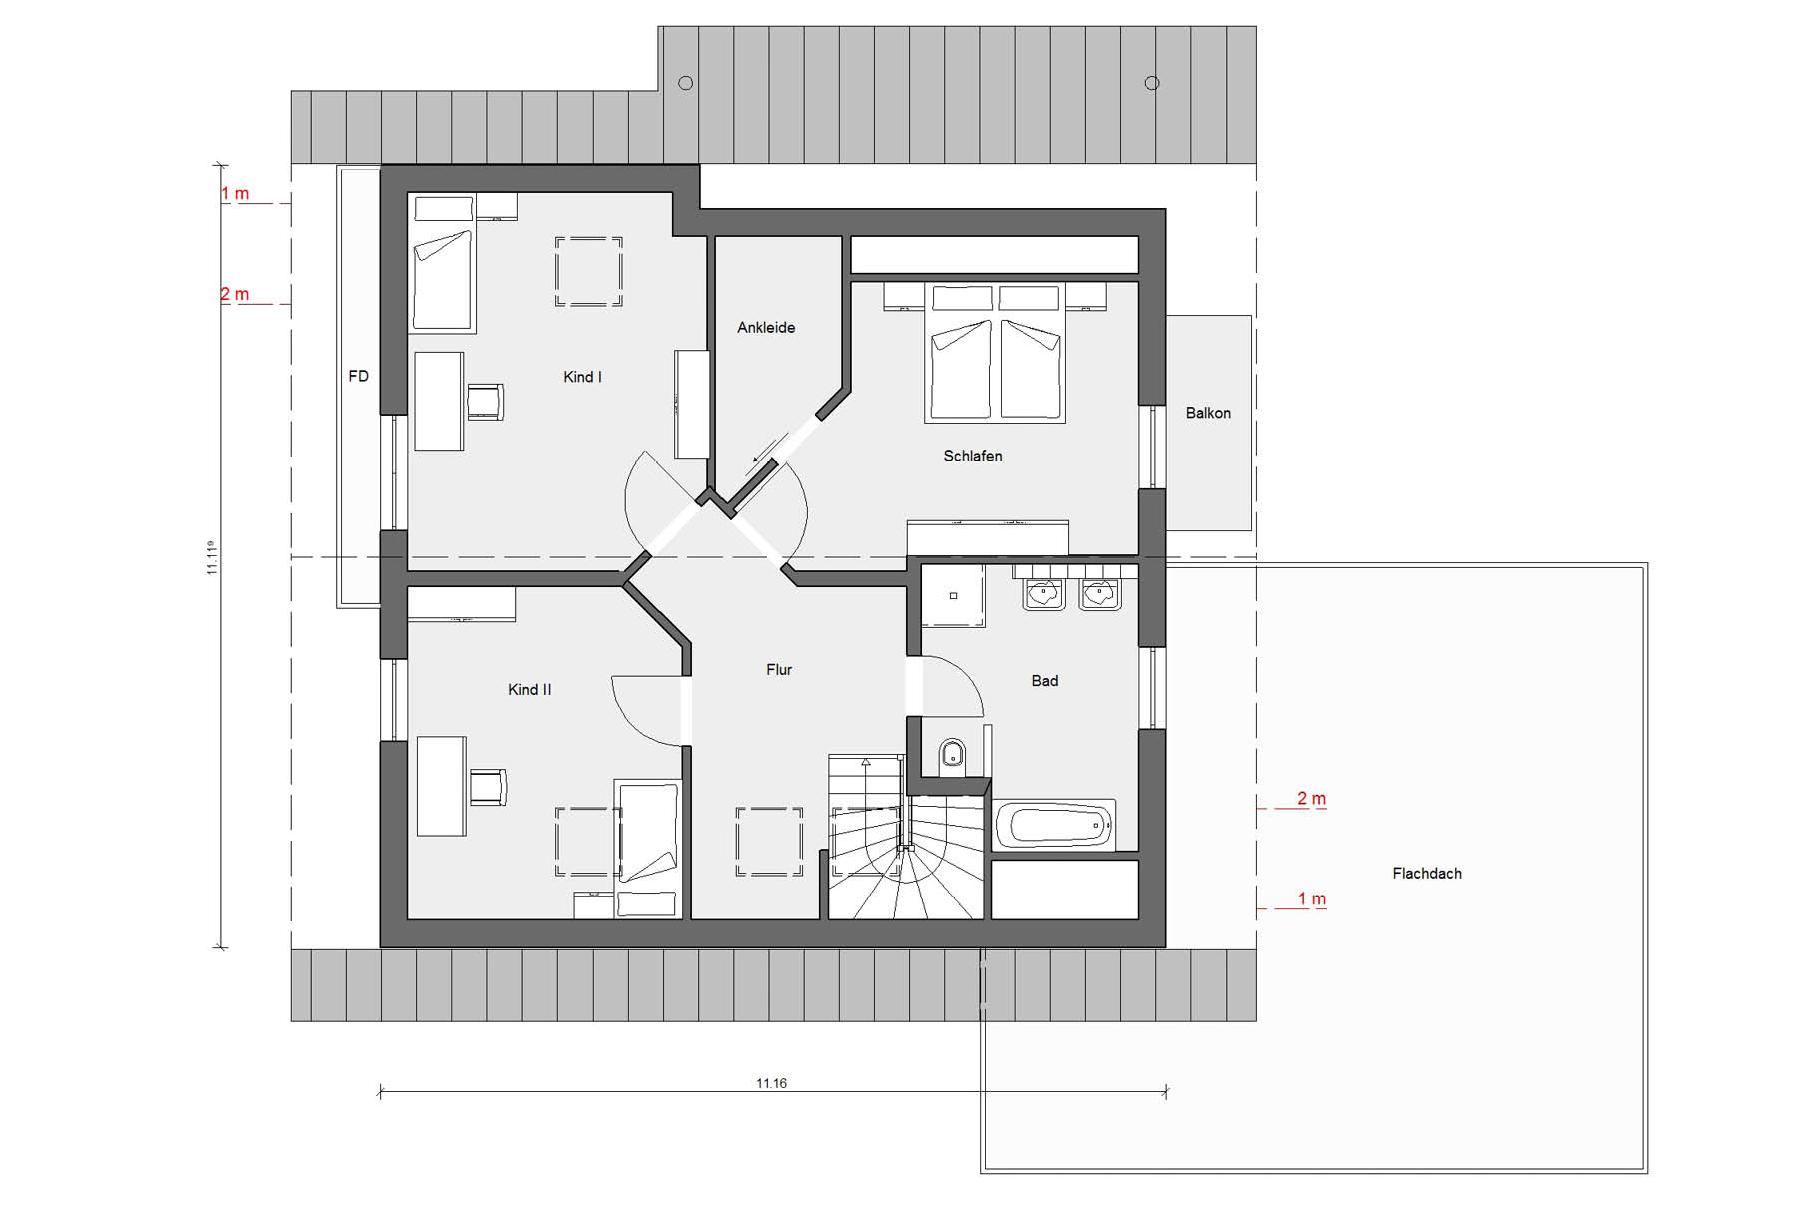 Floor plan attic E 15-205.1 House with conservatory